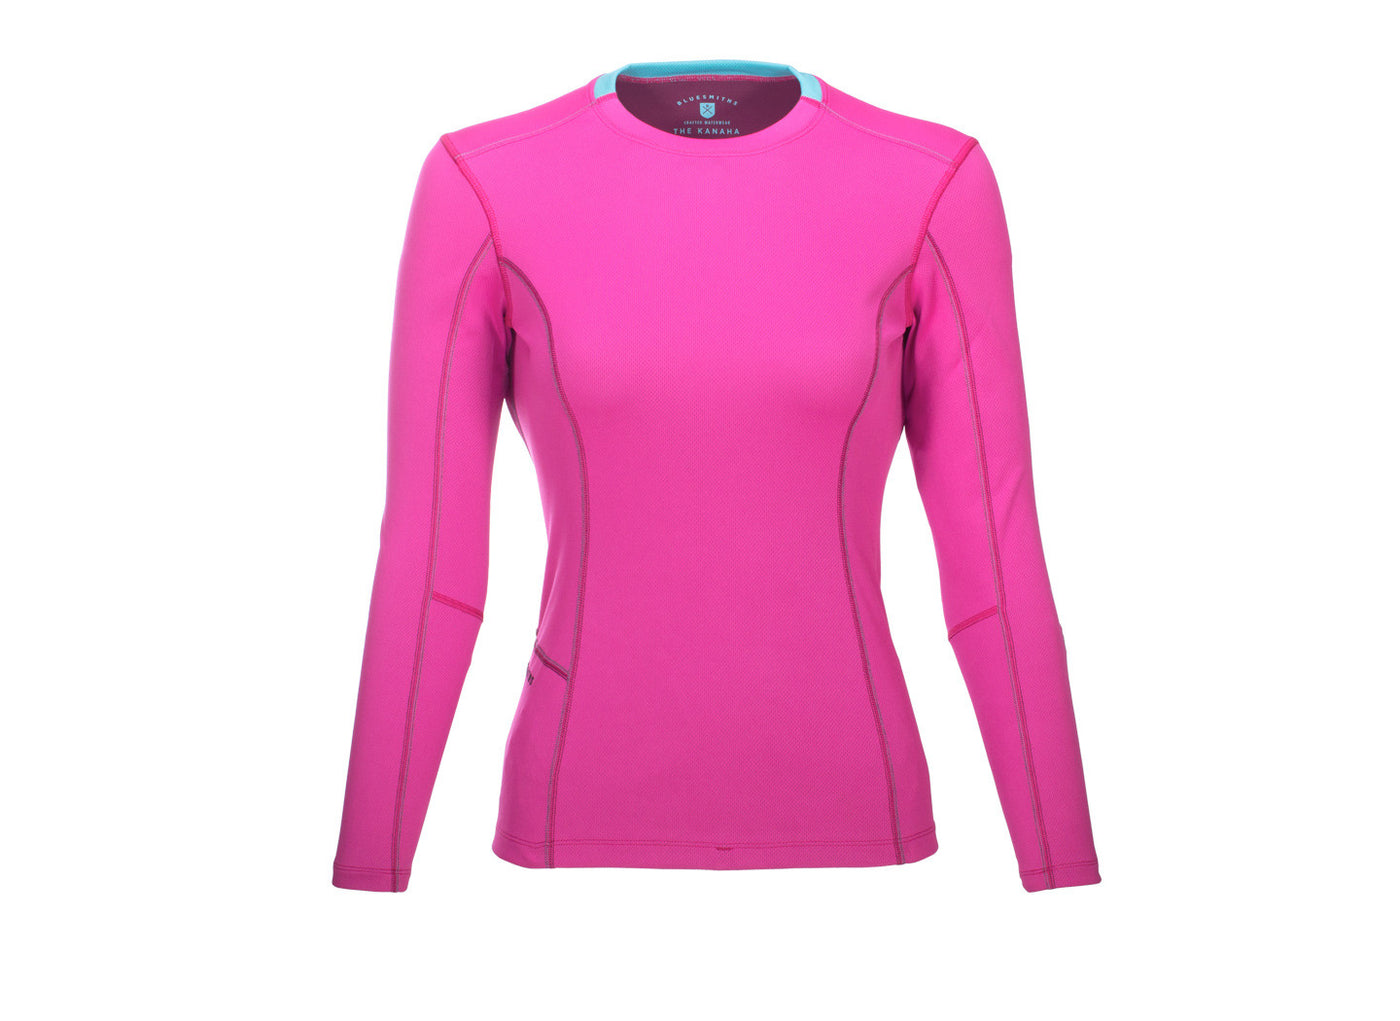 The Kanaha Hydrophobic Shirt for Women in Hibiscus Pink (Blue Atoll) - The World's Finest Waterwear | BLUESMITHS